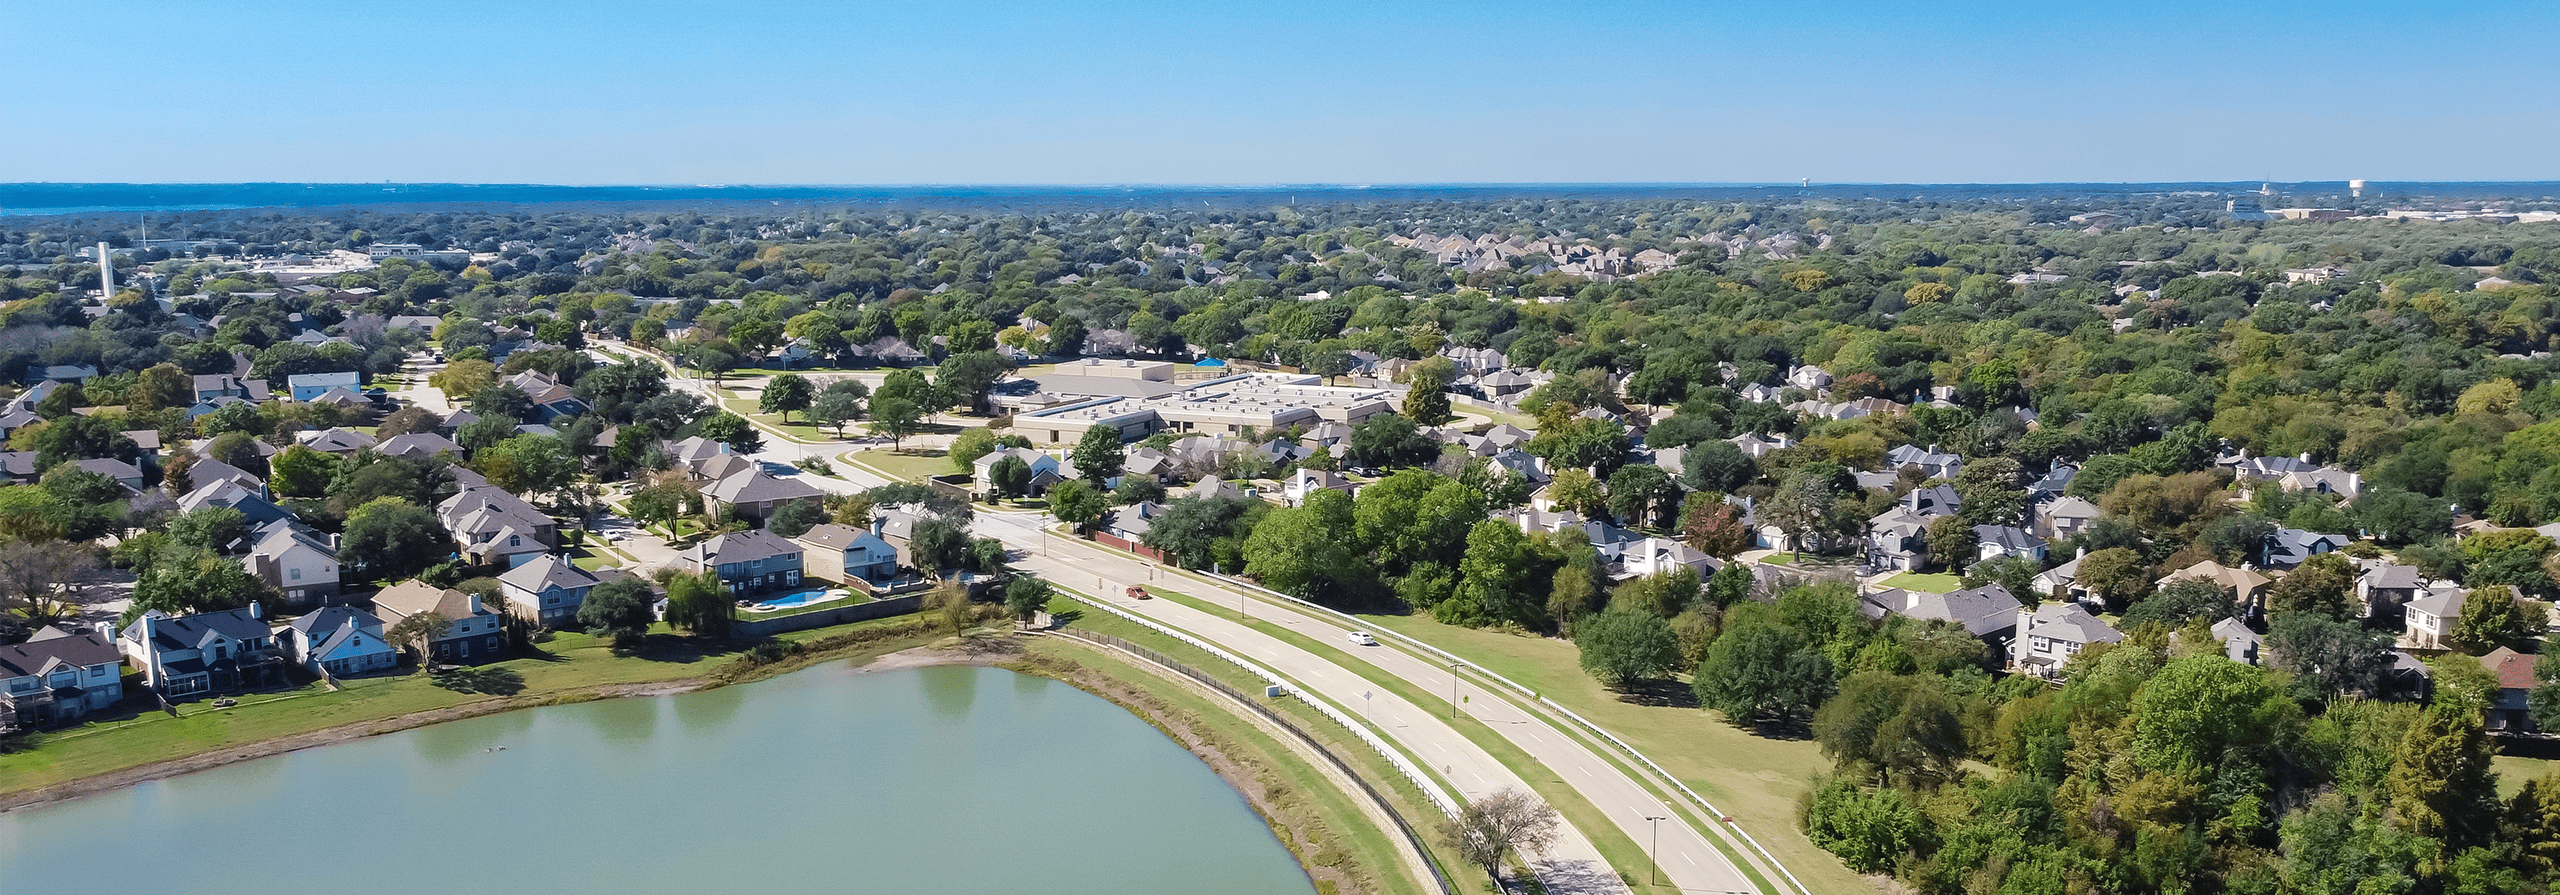 Aerial view residential neighborhood with Grapevine Lake in horizontal line. Row of upscale two story suburban residential houses near local pond in Flower Mound, Texas, America